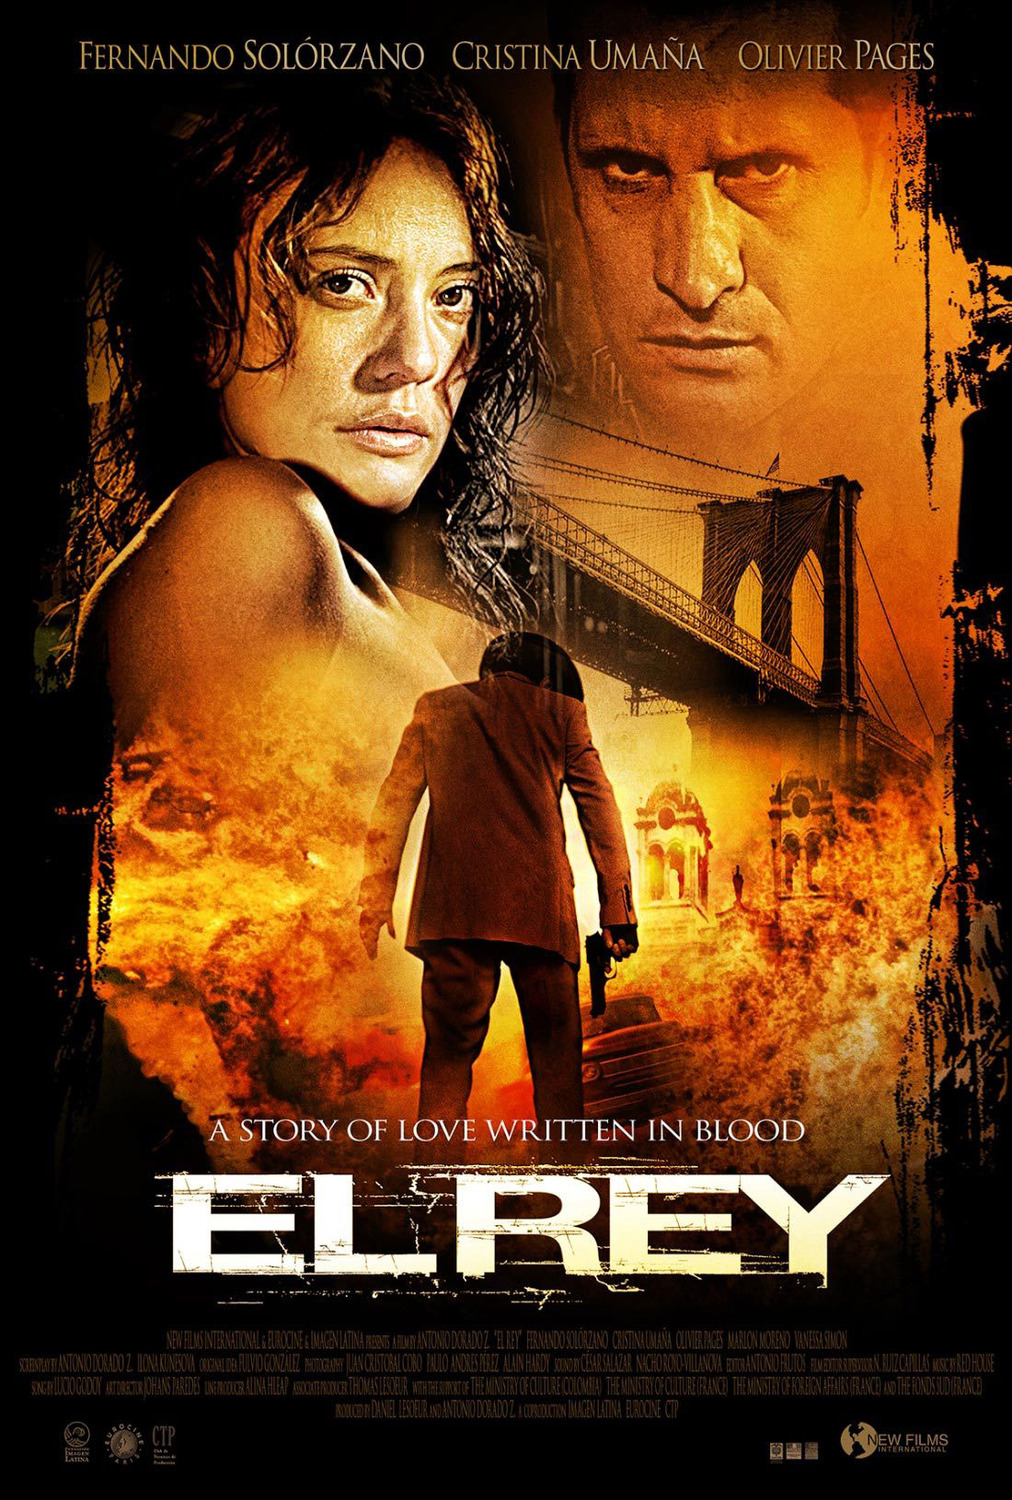 Extra Large Movie Poster Image for El rey (#1 of 2)